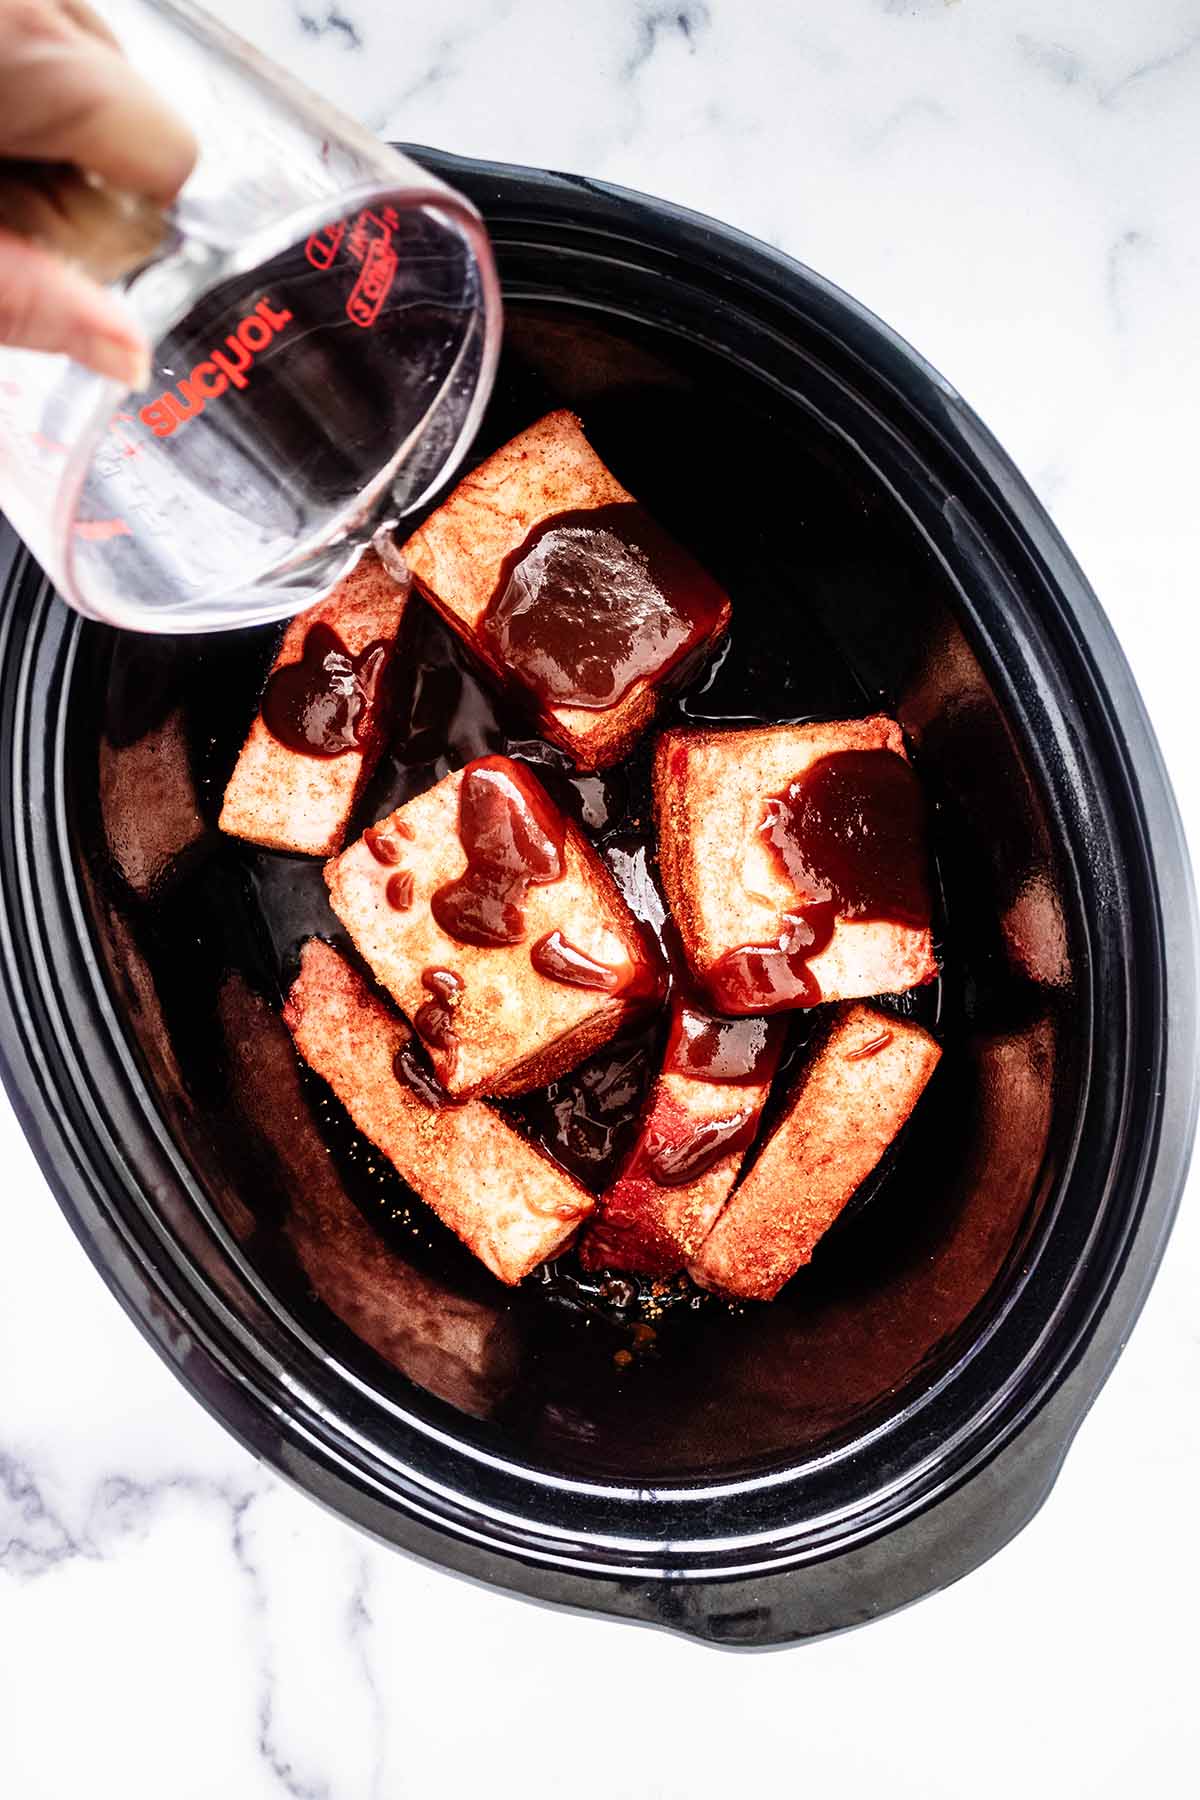 Beef short ribs in a slow cooker topped with barbecue sauce.  Water is being poured over the top.